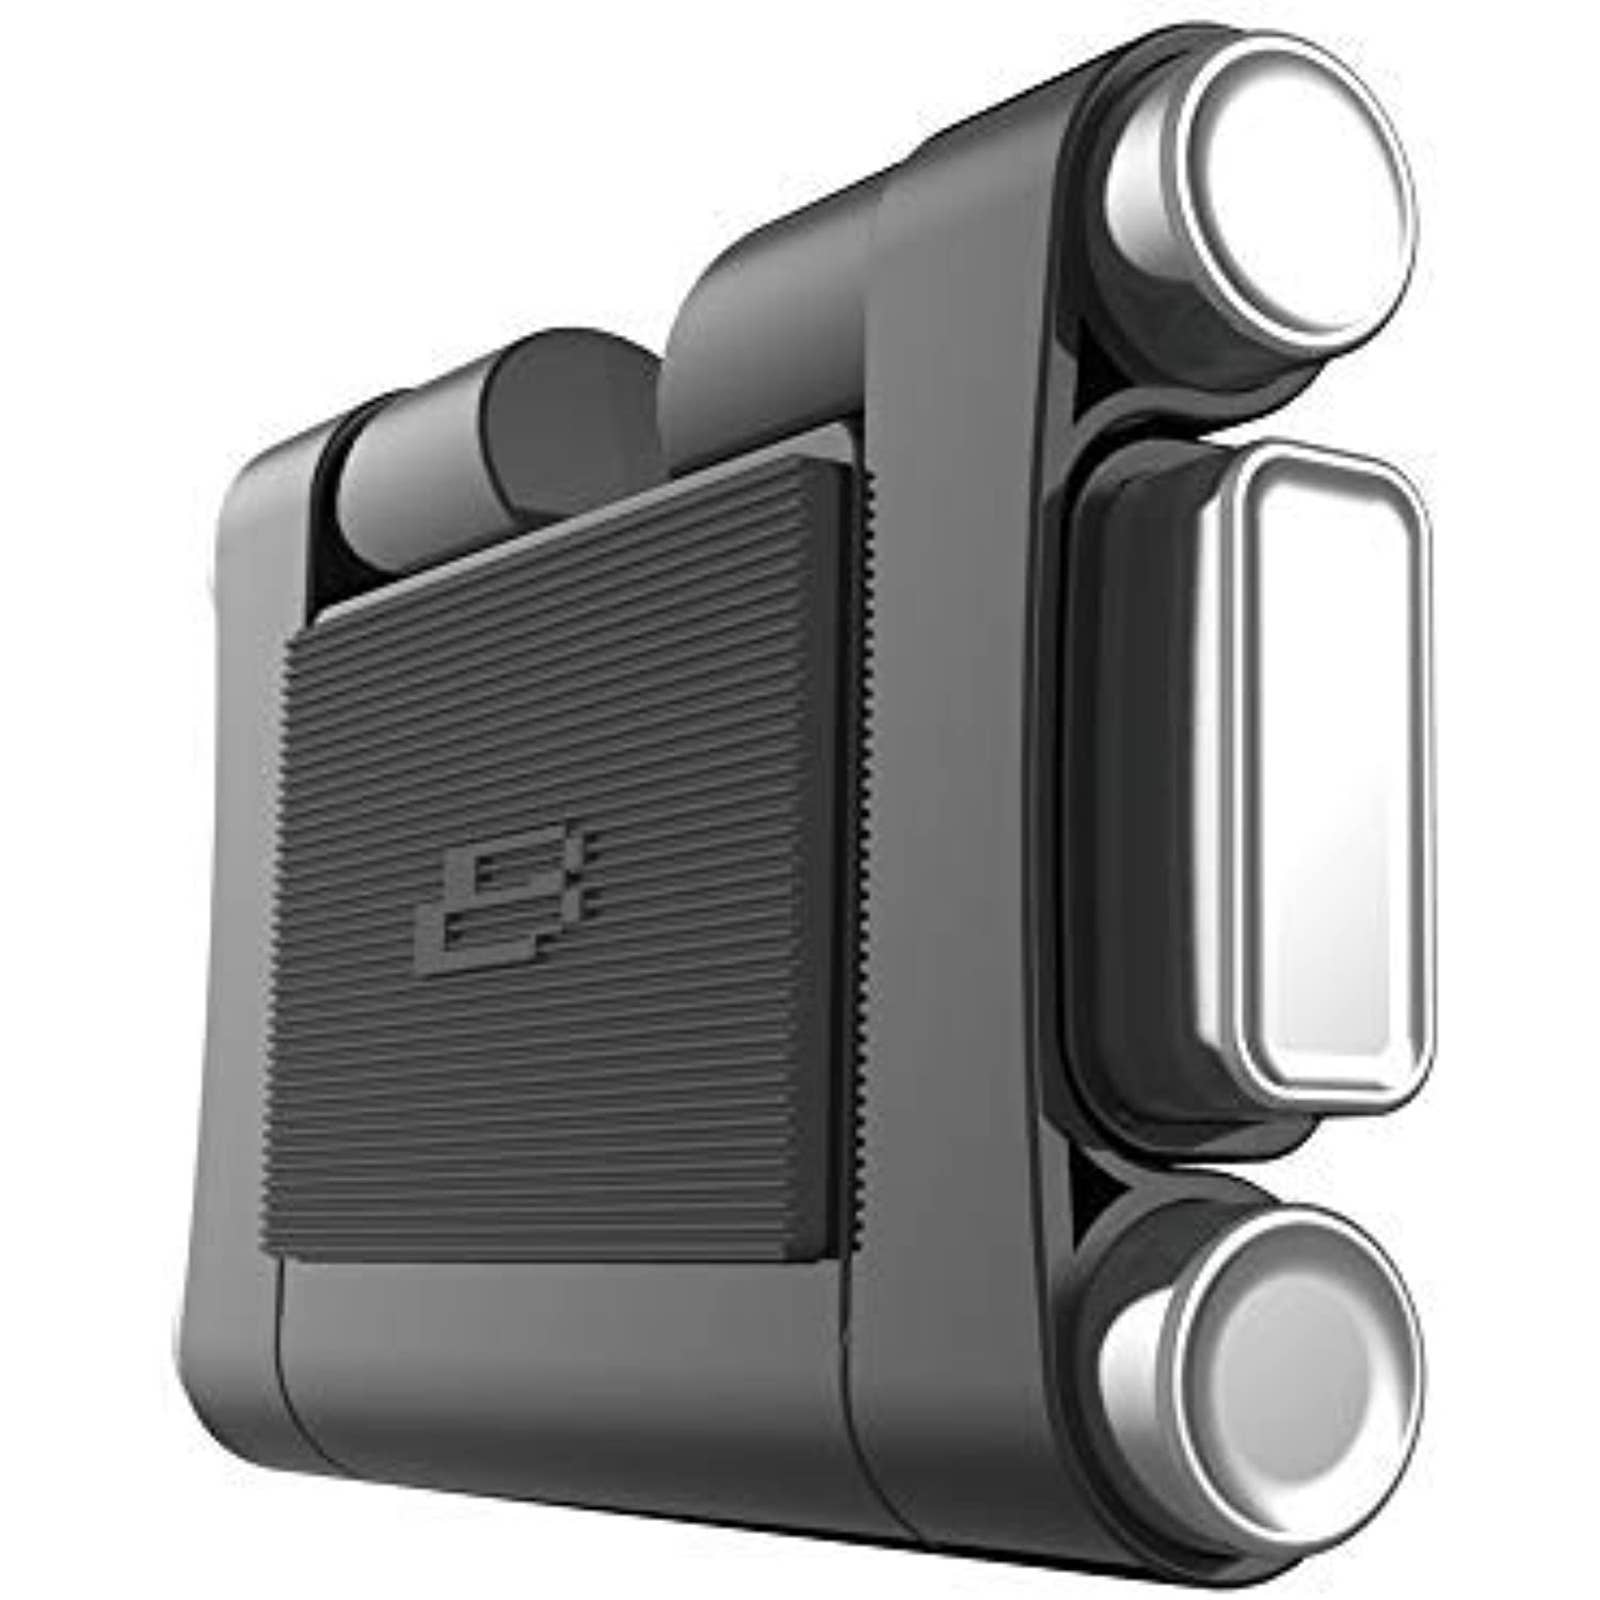 Bracketron - BT1-935-2 Roadtripper Travel Mount for Most Smartphones and Tablets Up to 10.1" - Black And Silver